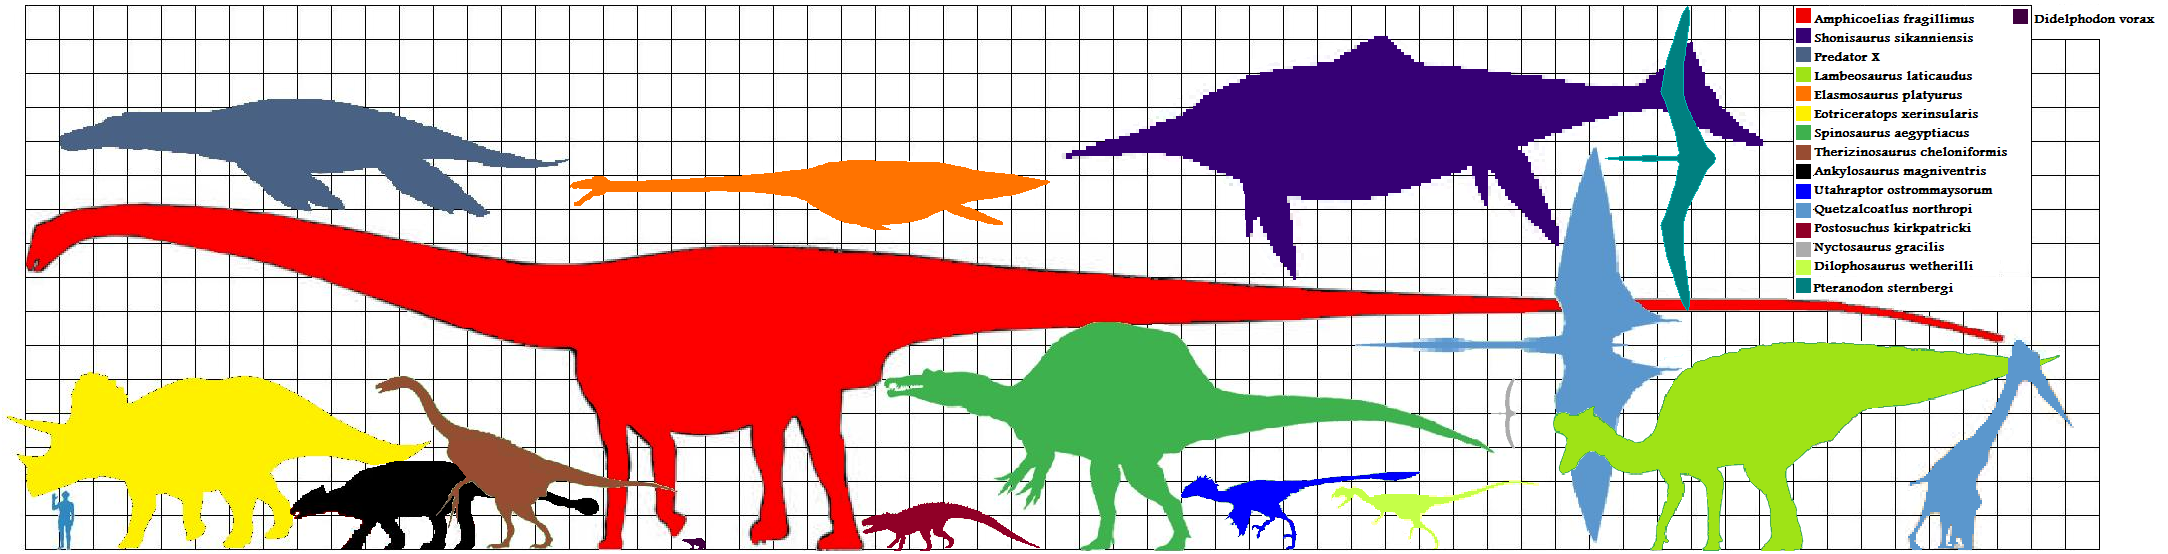 Largest mesosoic animals.png